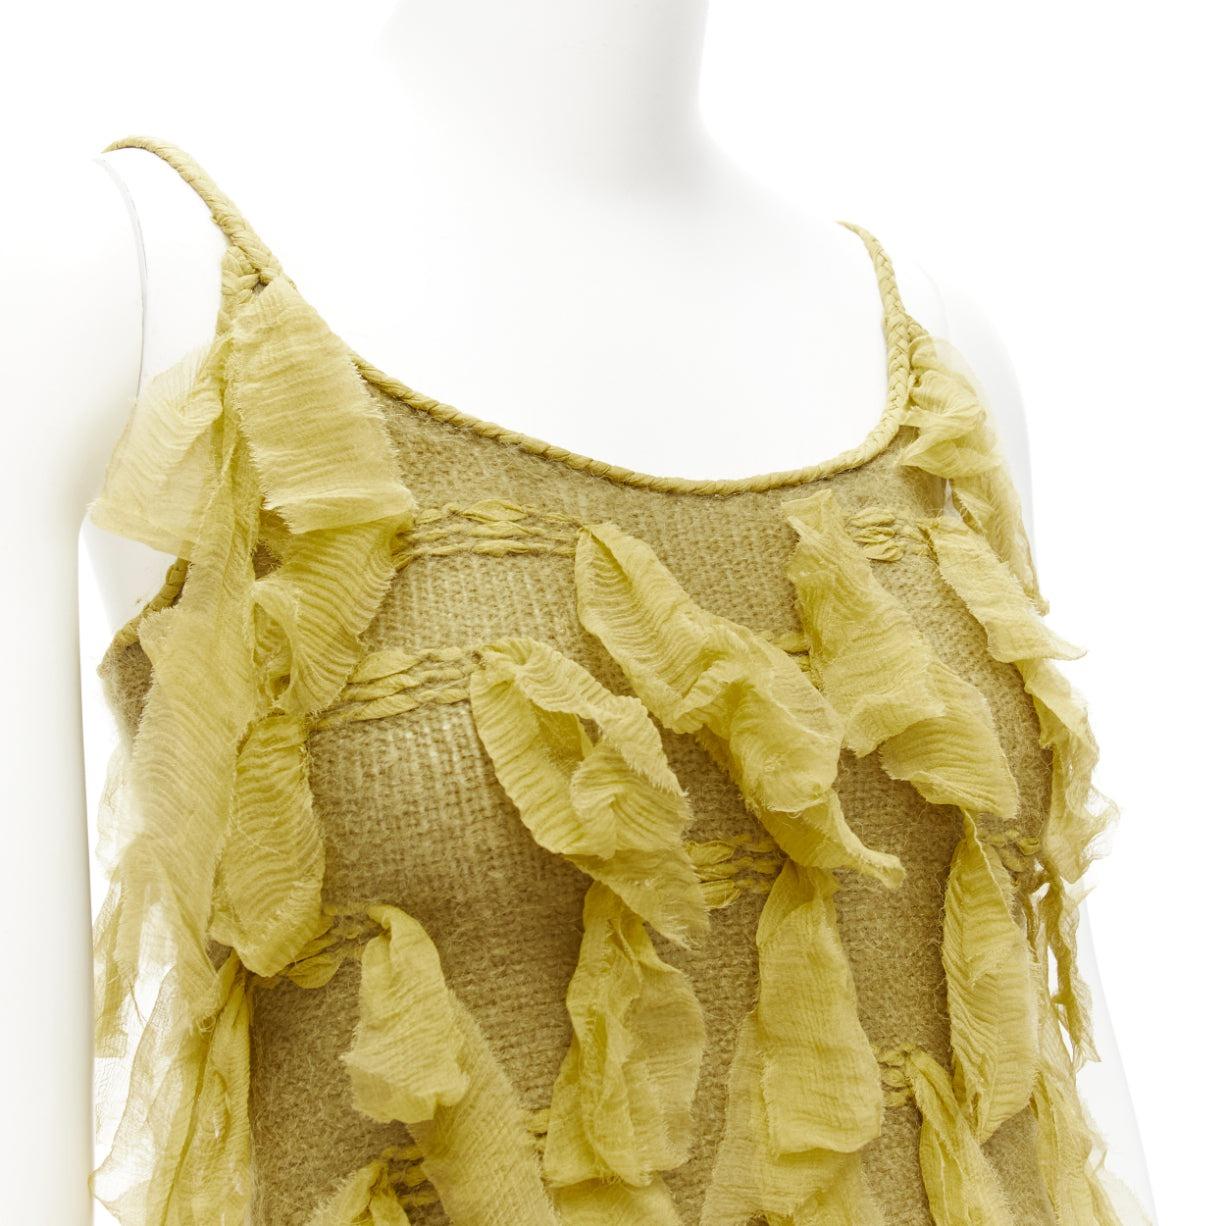 CHRISTIAN DIOR John Galliano green silk mohair applique cami vest FR36 S
Reference: TGAS/D00835
Brand: Christian Dior
Designer: John Galliano
Collection: Fall Winter 2000
Material: Silk, Mohair, Blend
Color: Green
Pattern: Solid
Closure: